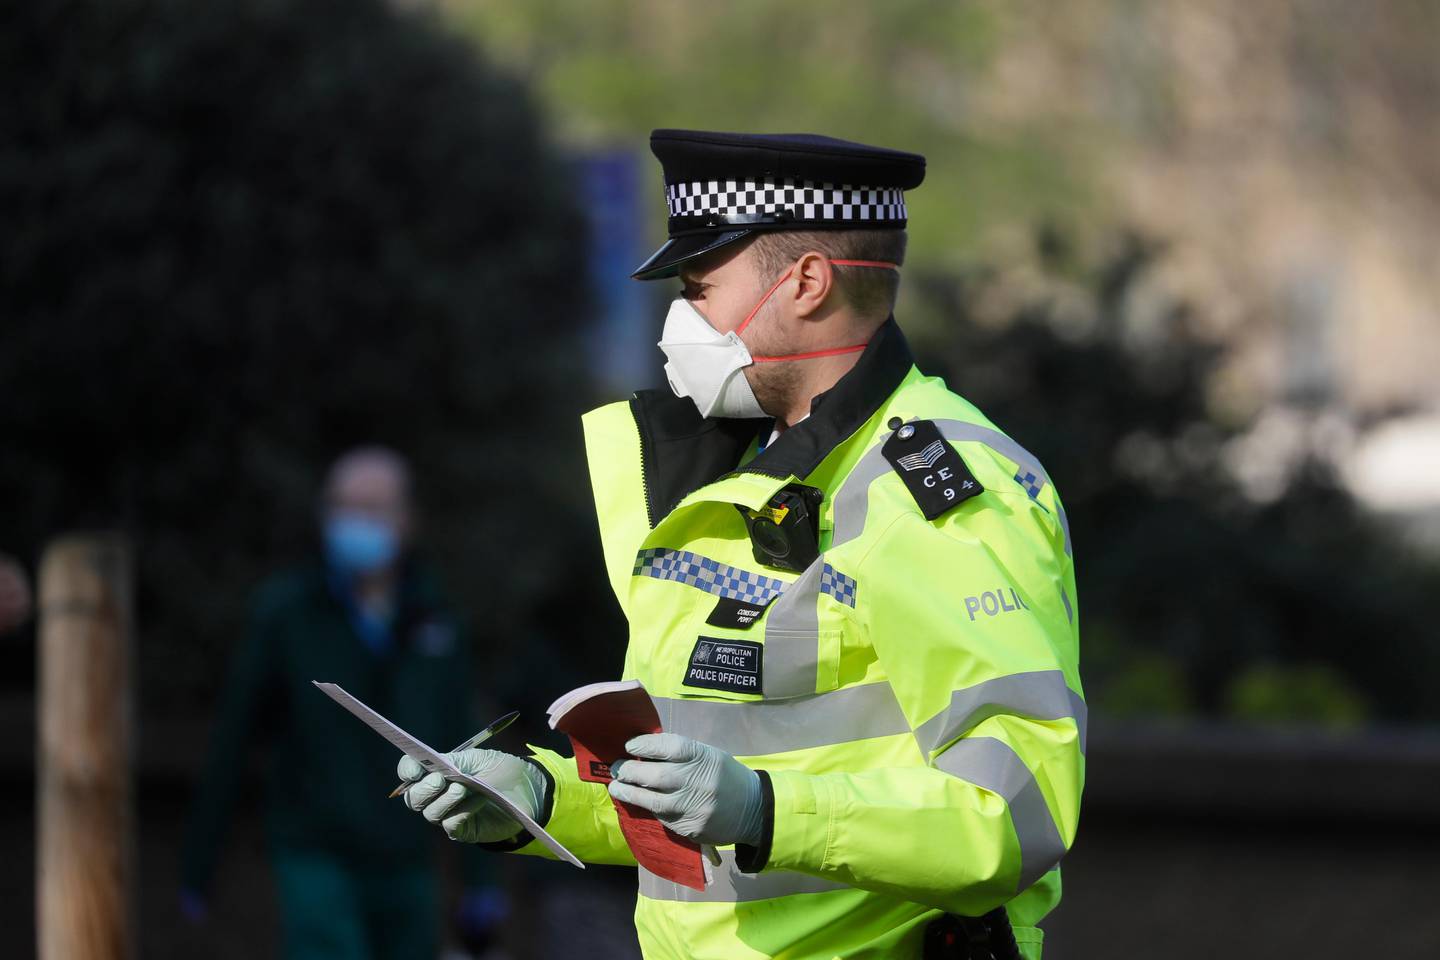 A British police officer wears a 3M face mask, with few police officers in Britain seen wearing face masks since the outbreak of the coronavirus, outside St Thomas' Hospital, in London, where Prime Minister Boris Johnson remains in intensive care as his coronavirus symptoms persist, Thursday, April 9, 2020. British Prime Minister Boris Johnson remains in intensive care with the coronavirus but is improving and sitting up in bed, a senior government minister said Wednesday, as the U.K. recorded its biggest spike in COVID-19 deaths to date. The new coronavirus causes mild or moderate symptoms for most people, but for some, especially older adults and people with existing health problems, it can cause more severe illness or death. (AP Photo/Kirsty Wigglesworth)